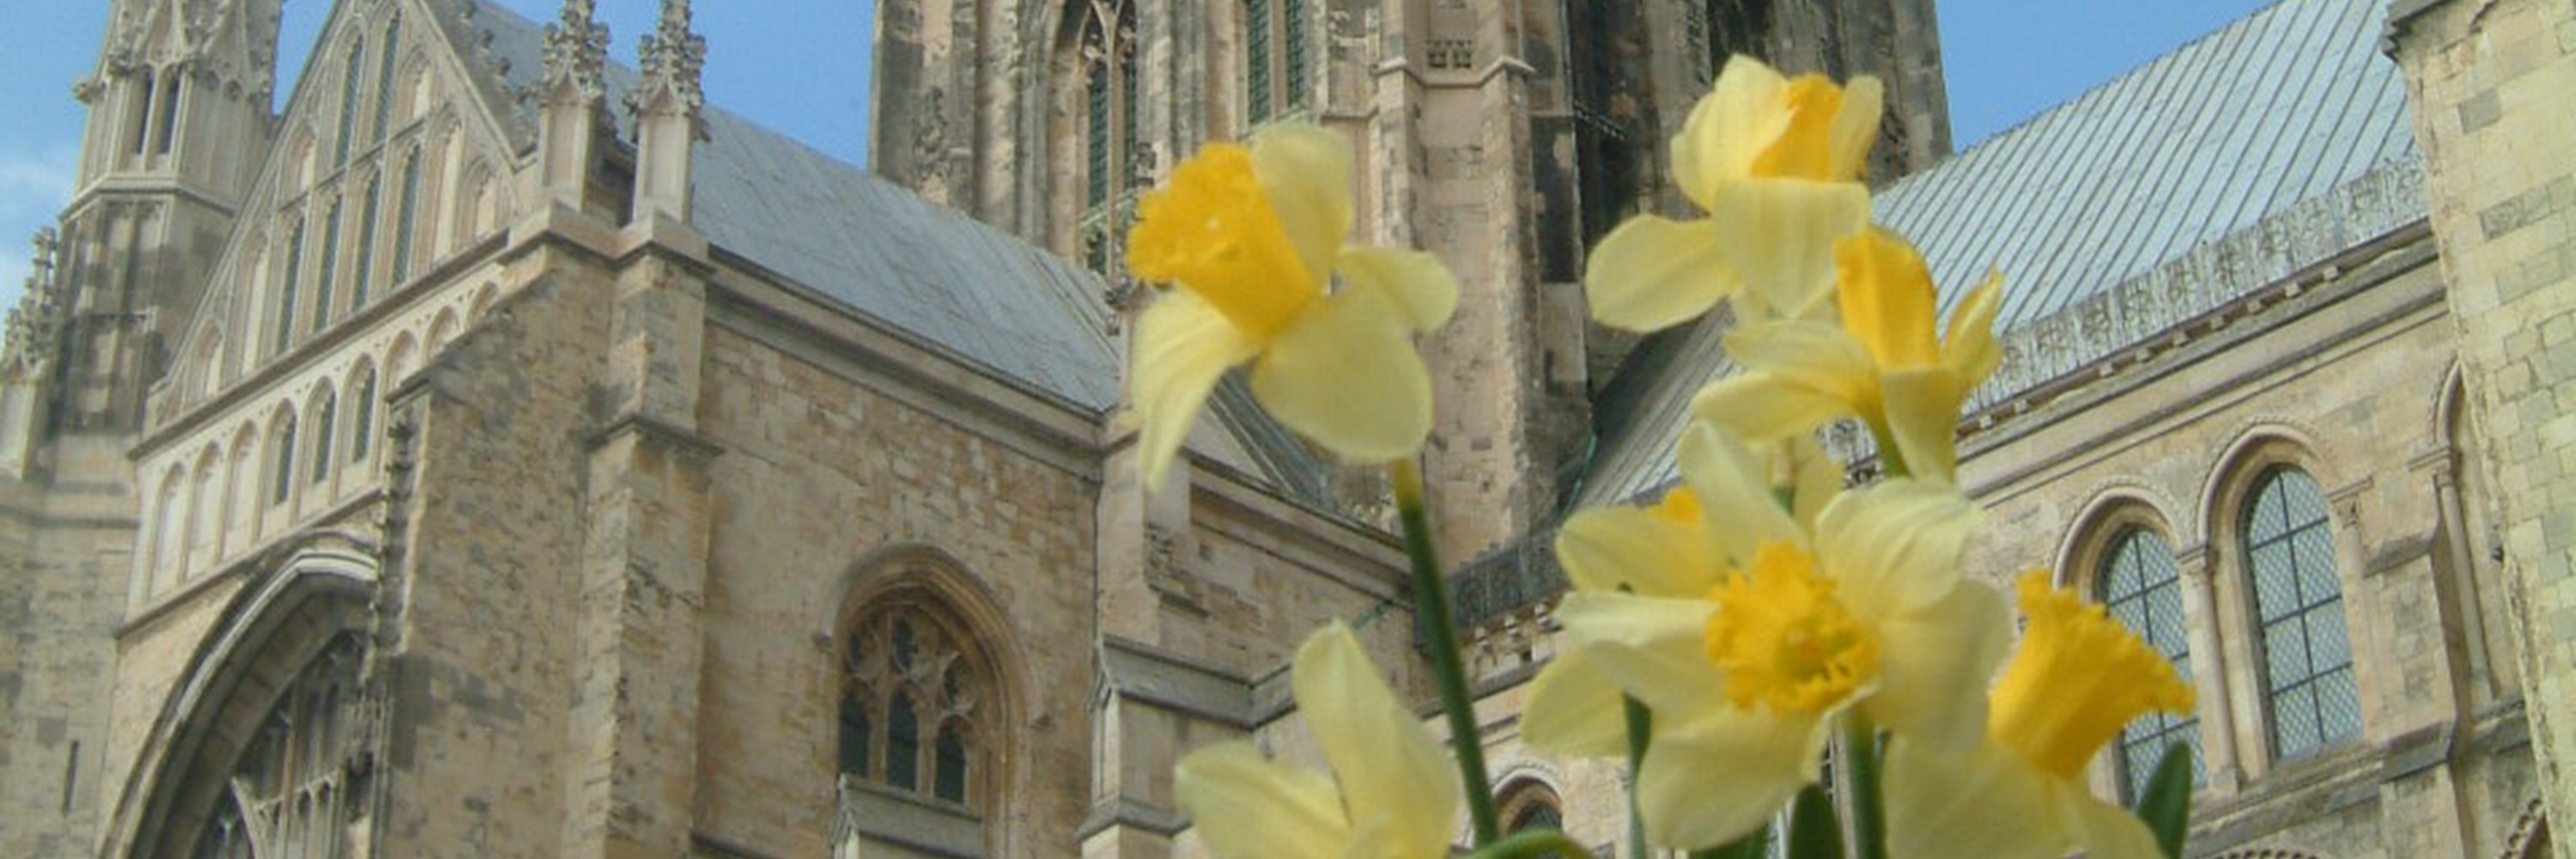 Daffodils in front of Bell Harry Tower